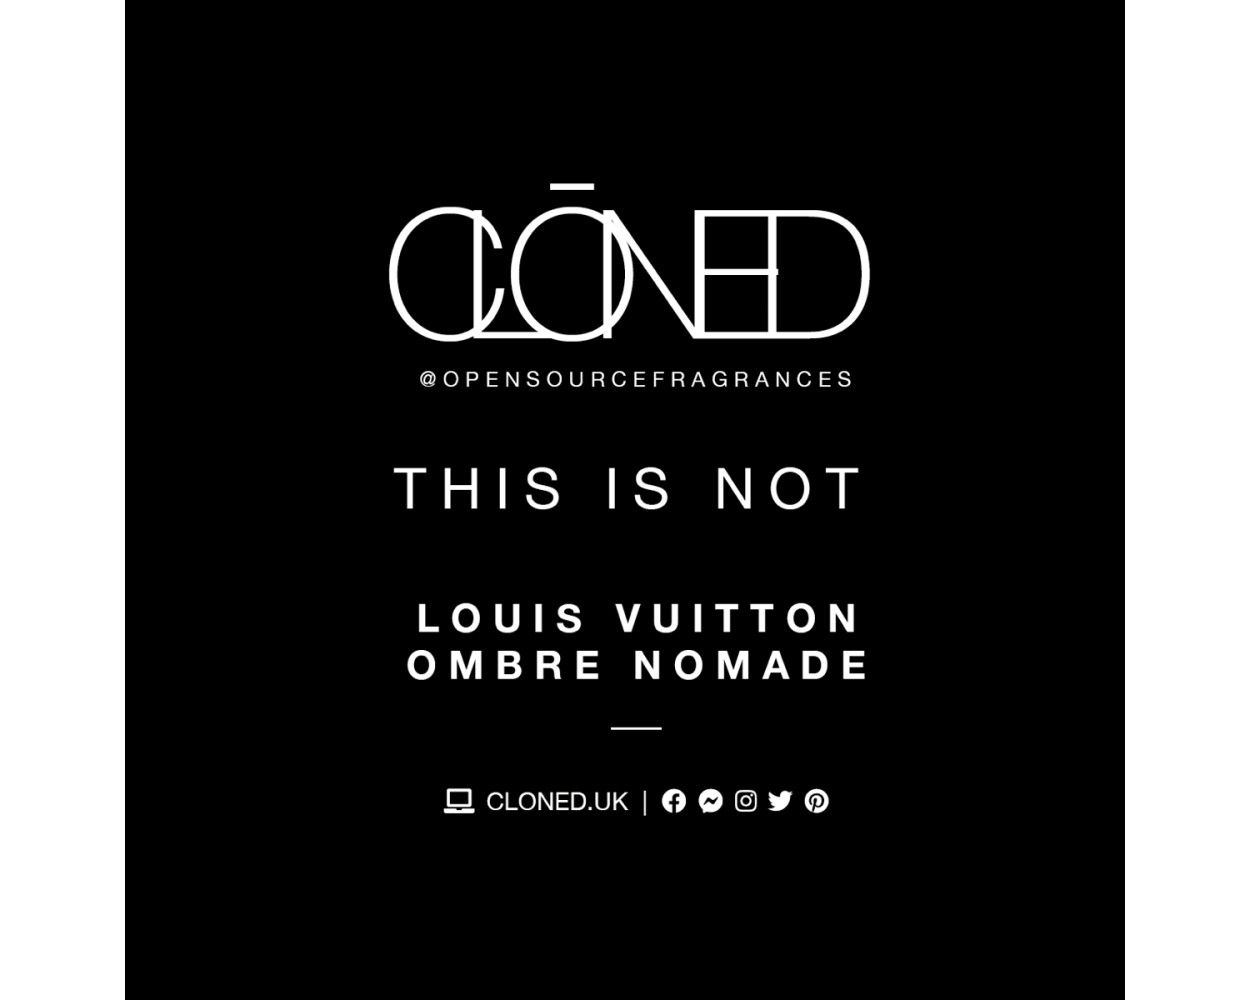 This is NOT Louis Vuitton Ombre Nomade